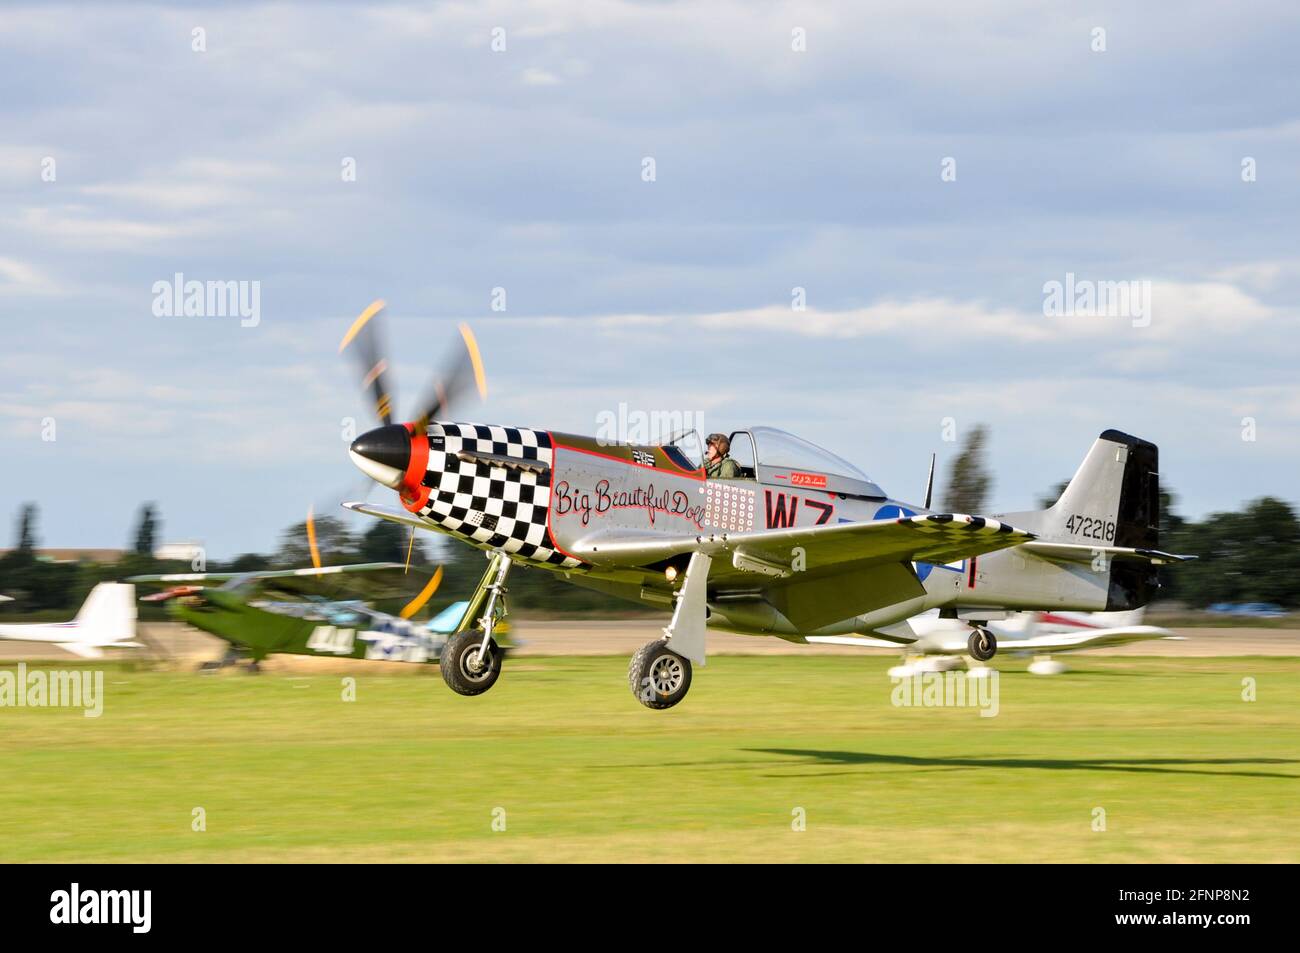 North American P-51D Mustang fighter plane named Big Beautiful Doll landing at Little Gransden airfield, Cambridgeshire, UK. Flown by Rob Davies Stock Photo